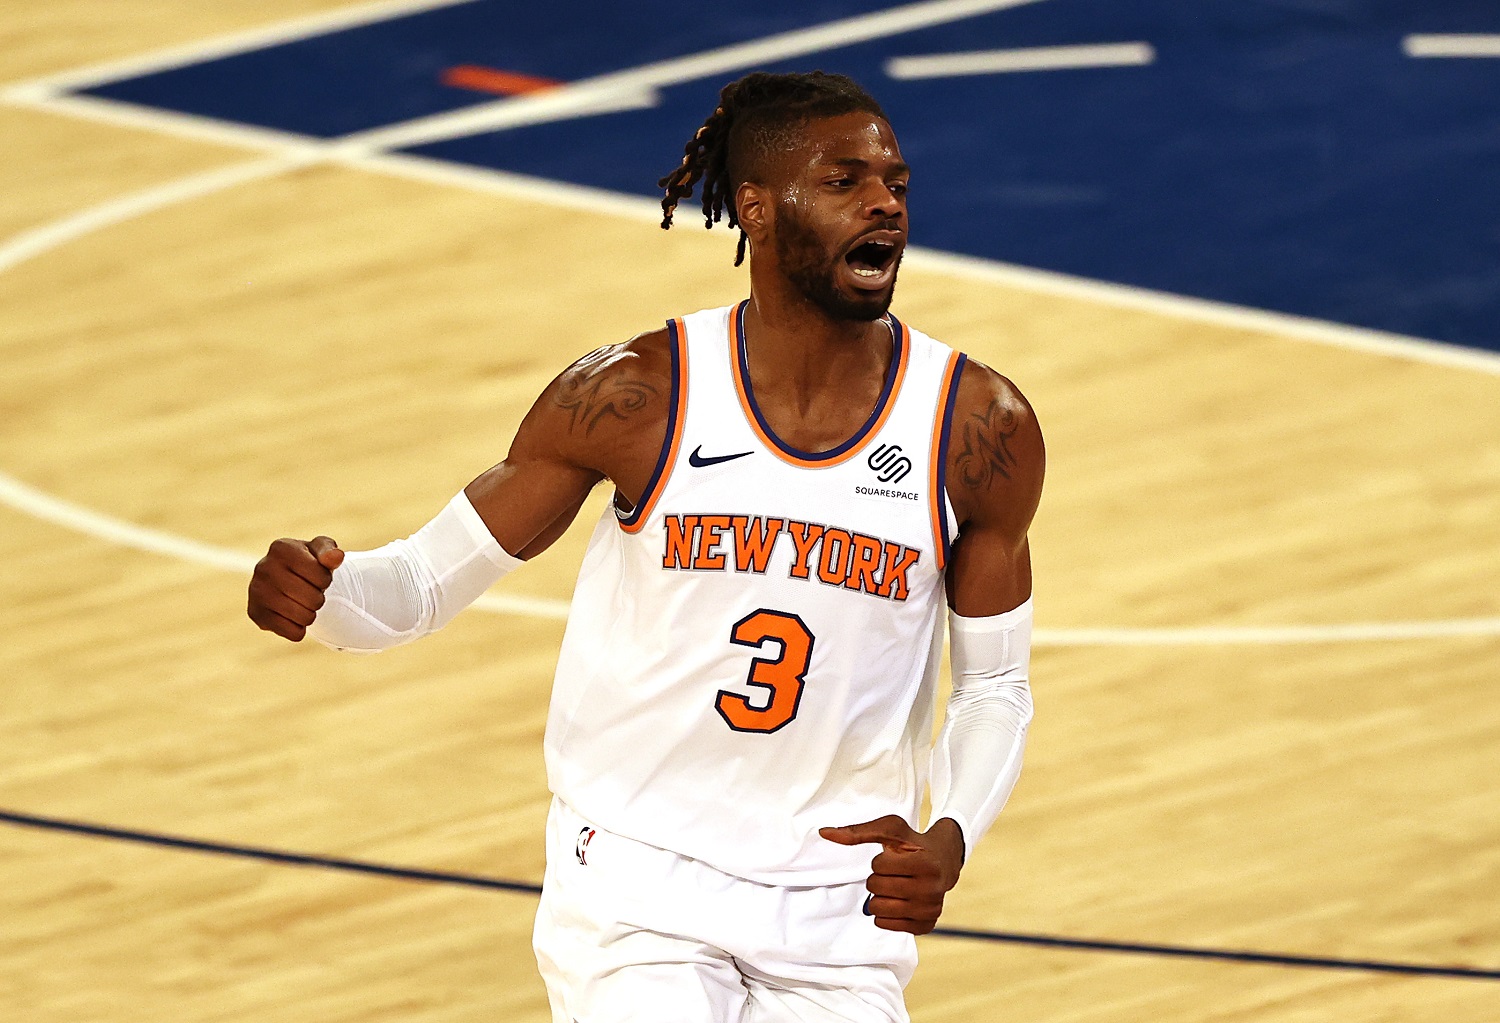 Nerlens Noel of the New York Knicks reacts after he loses control of the ball against the Philadelphia 76ers at Madison Square Garden on March 21, 2021.